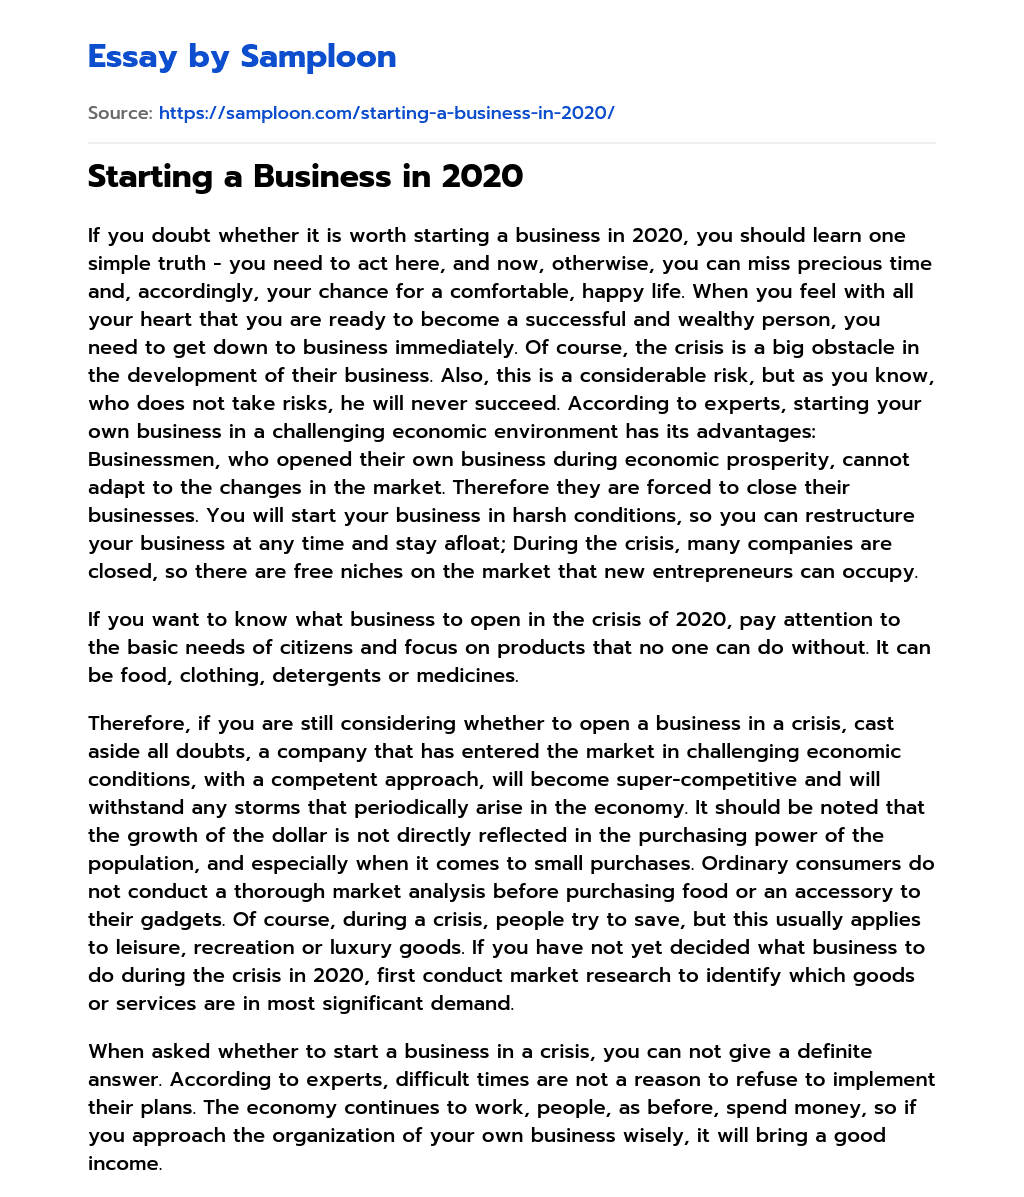 Starting a Business in 2020 essay